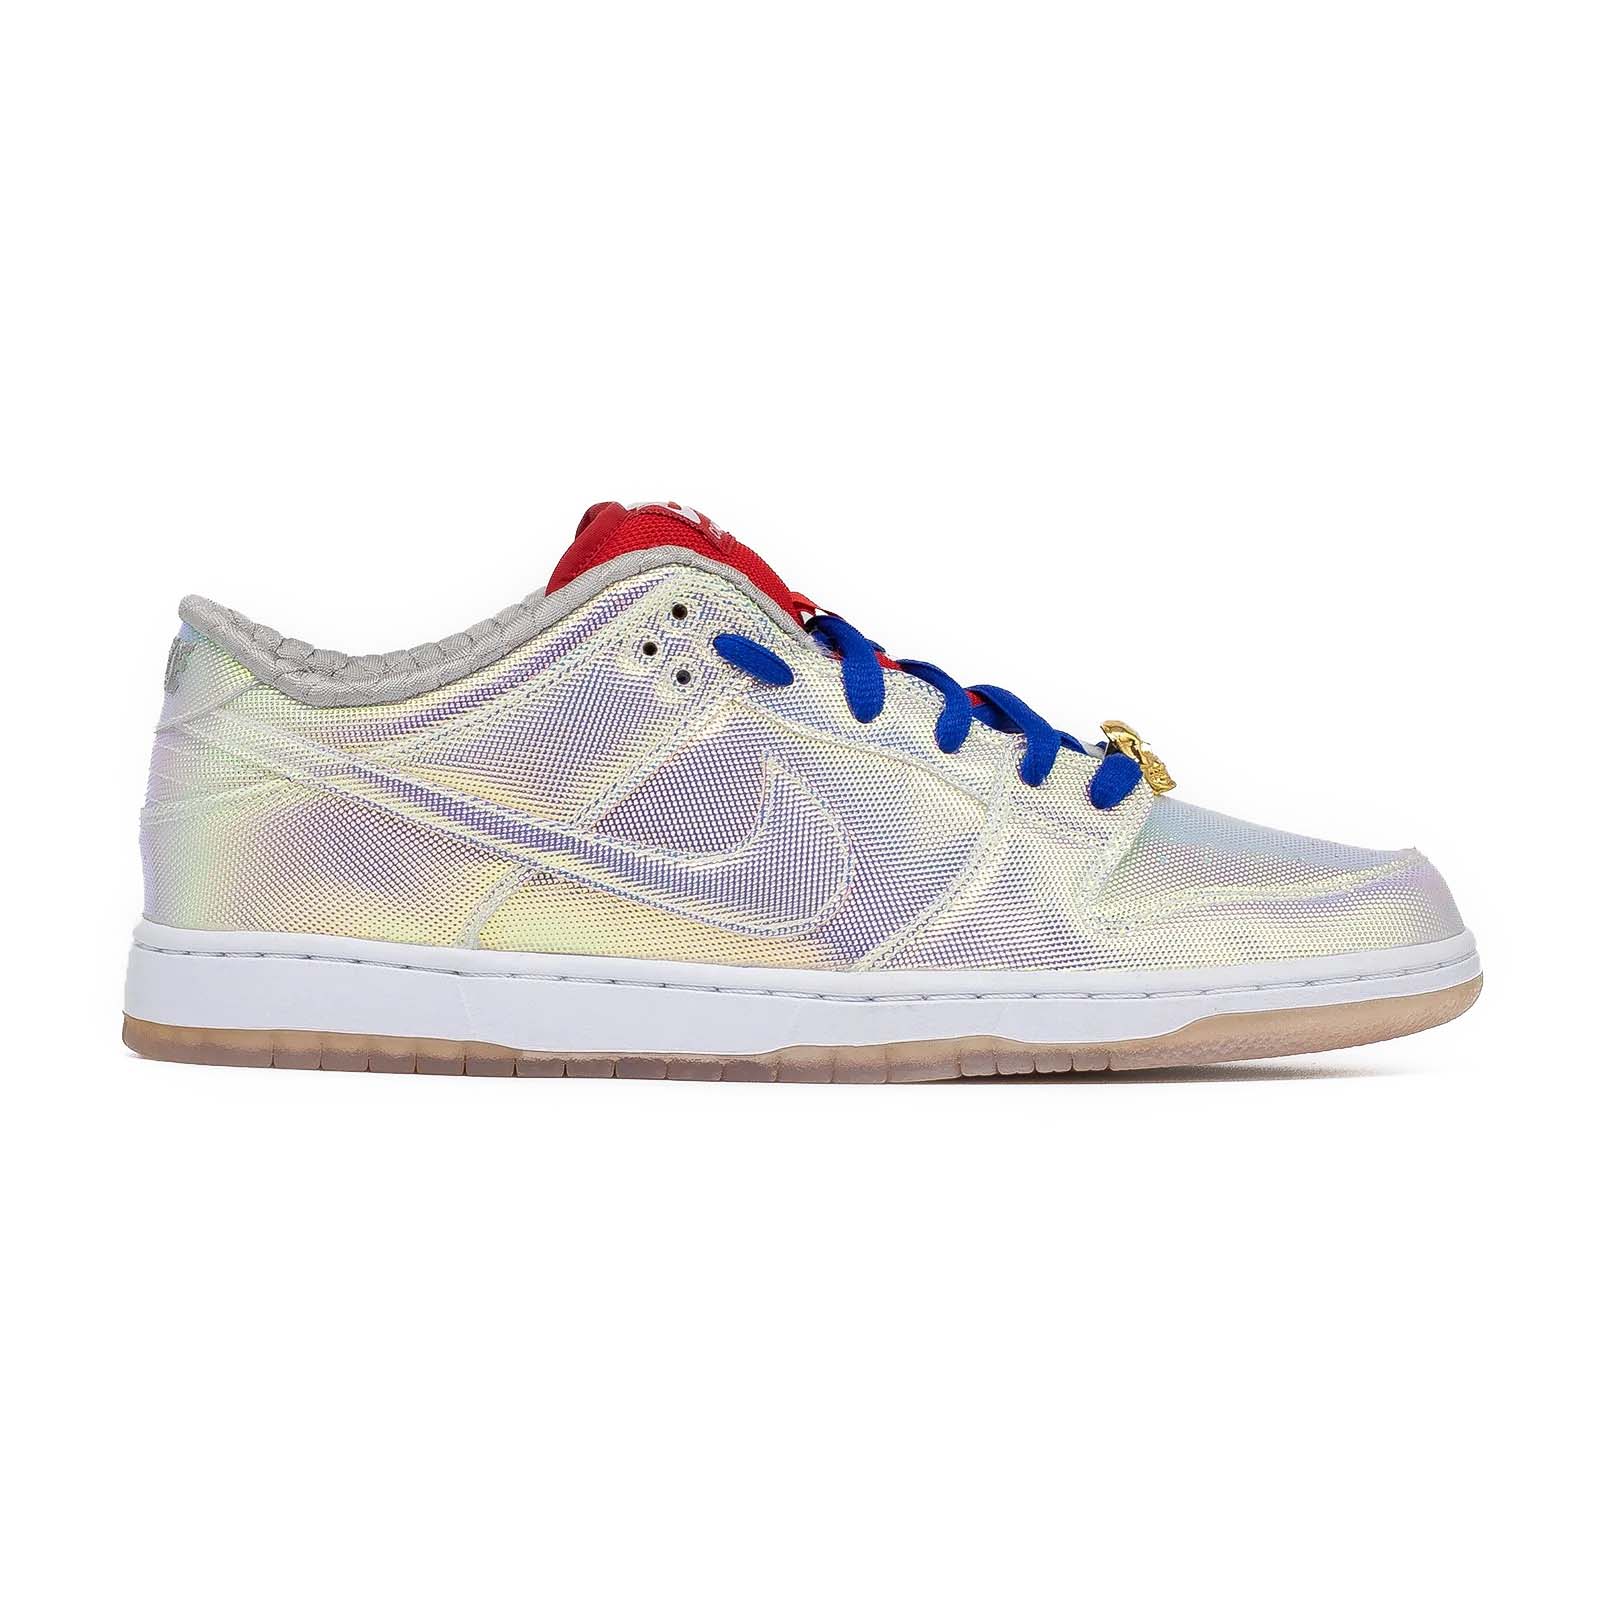 Nike SB Dunk Low, Concepts Holy Grail